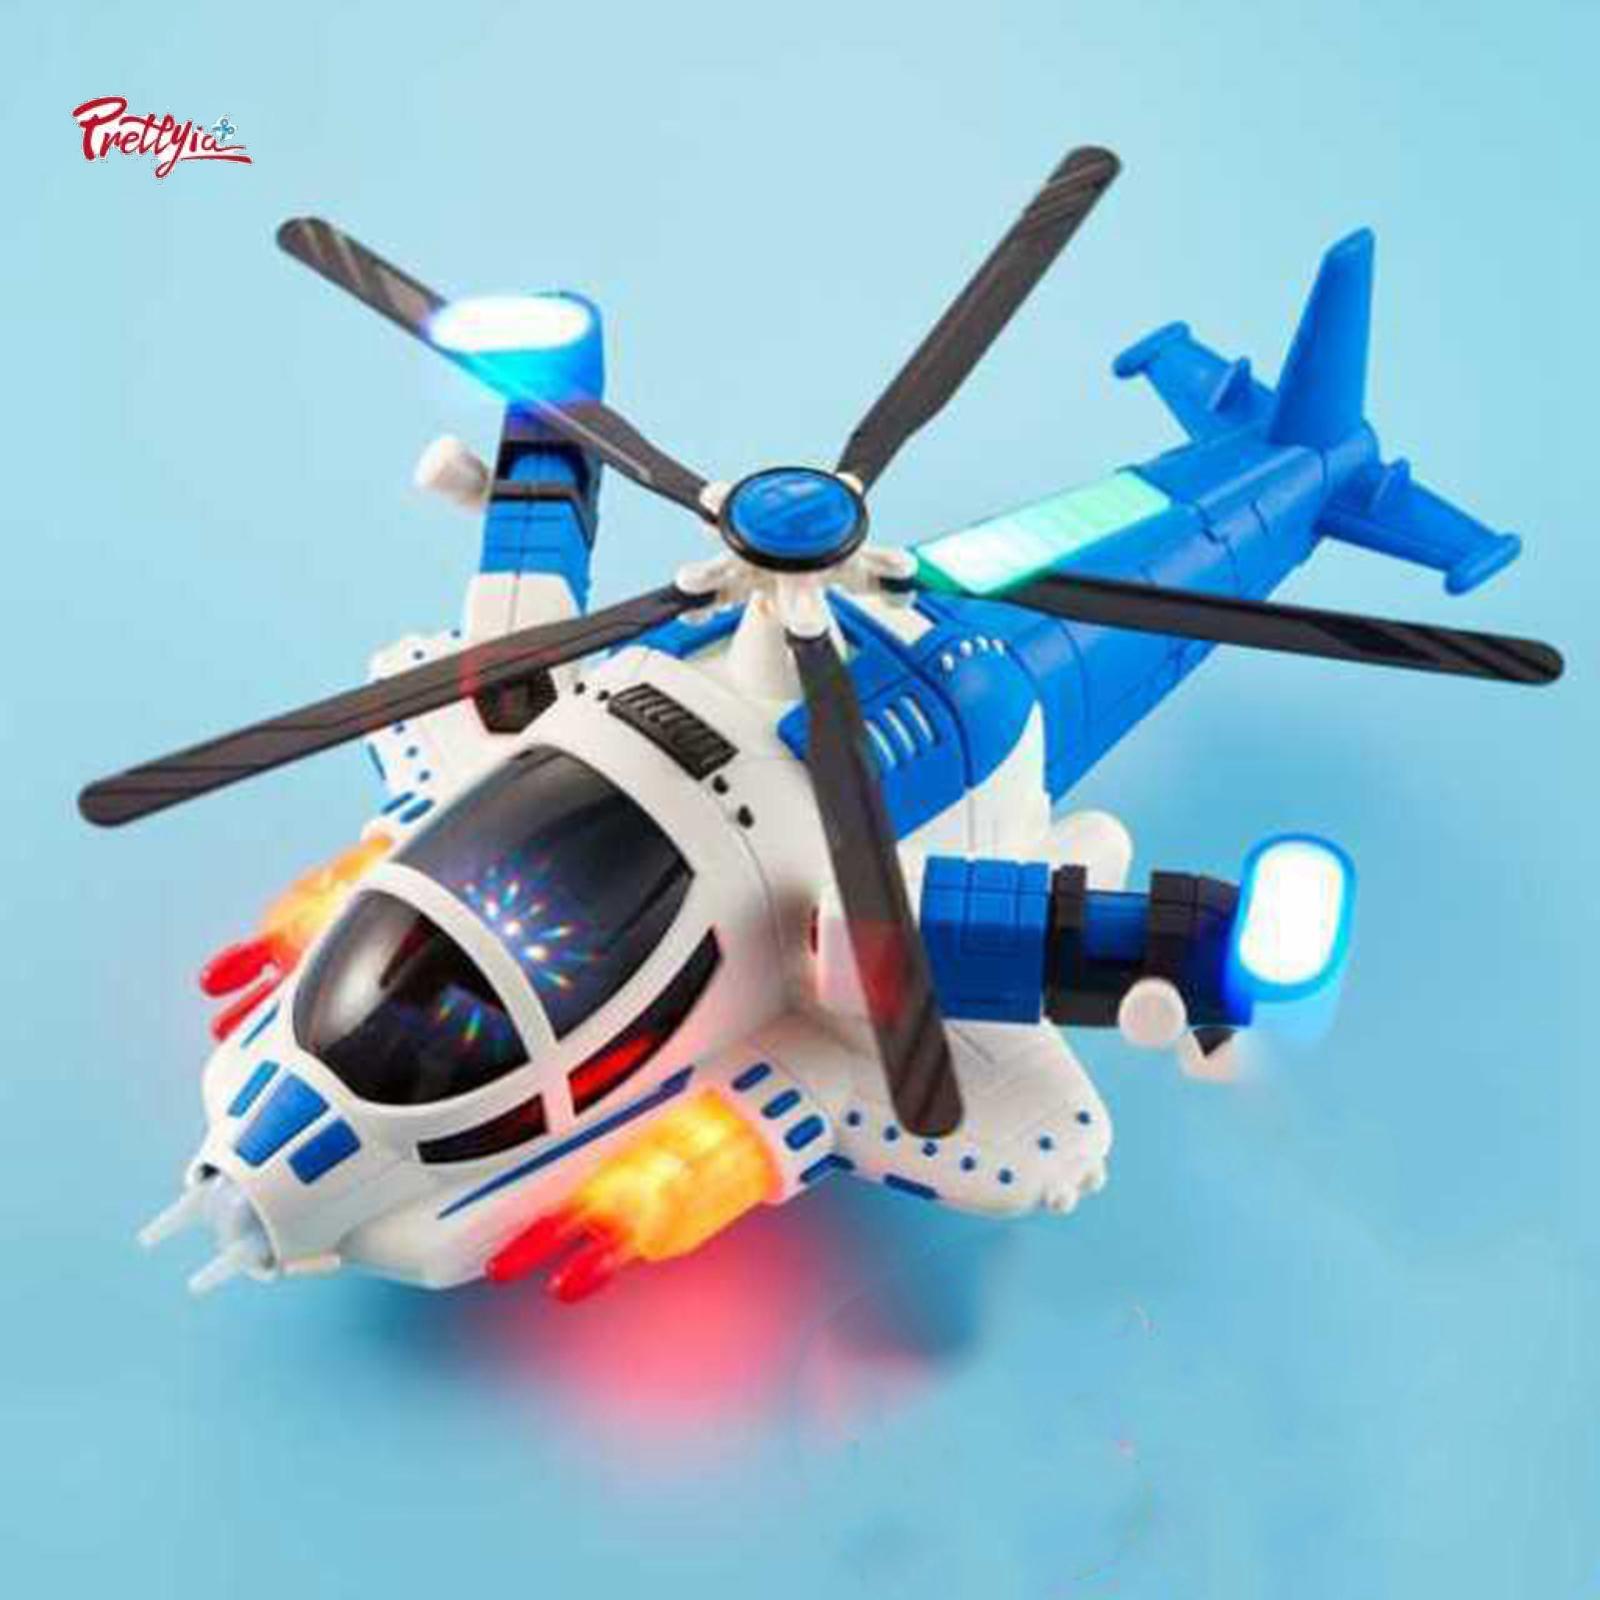 Prettyia Helicopter with Lights and Music Airplane for Boys Girls Kids